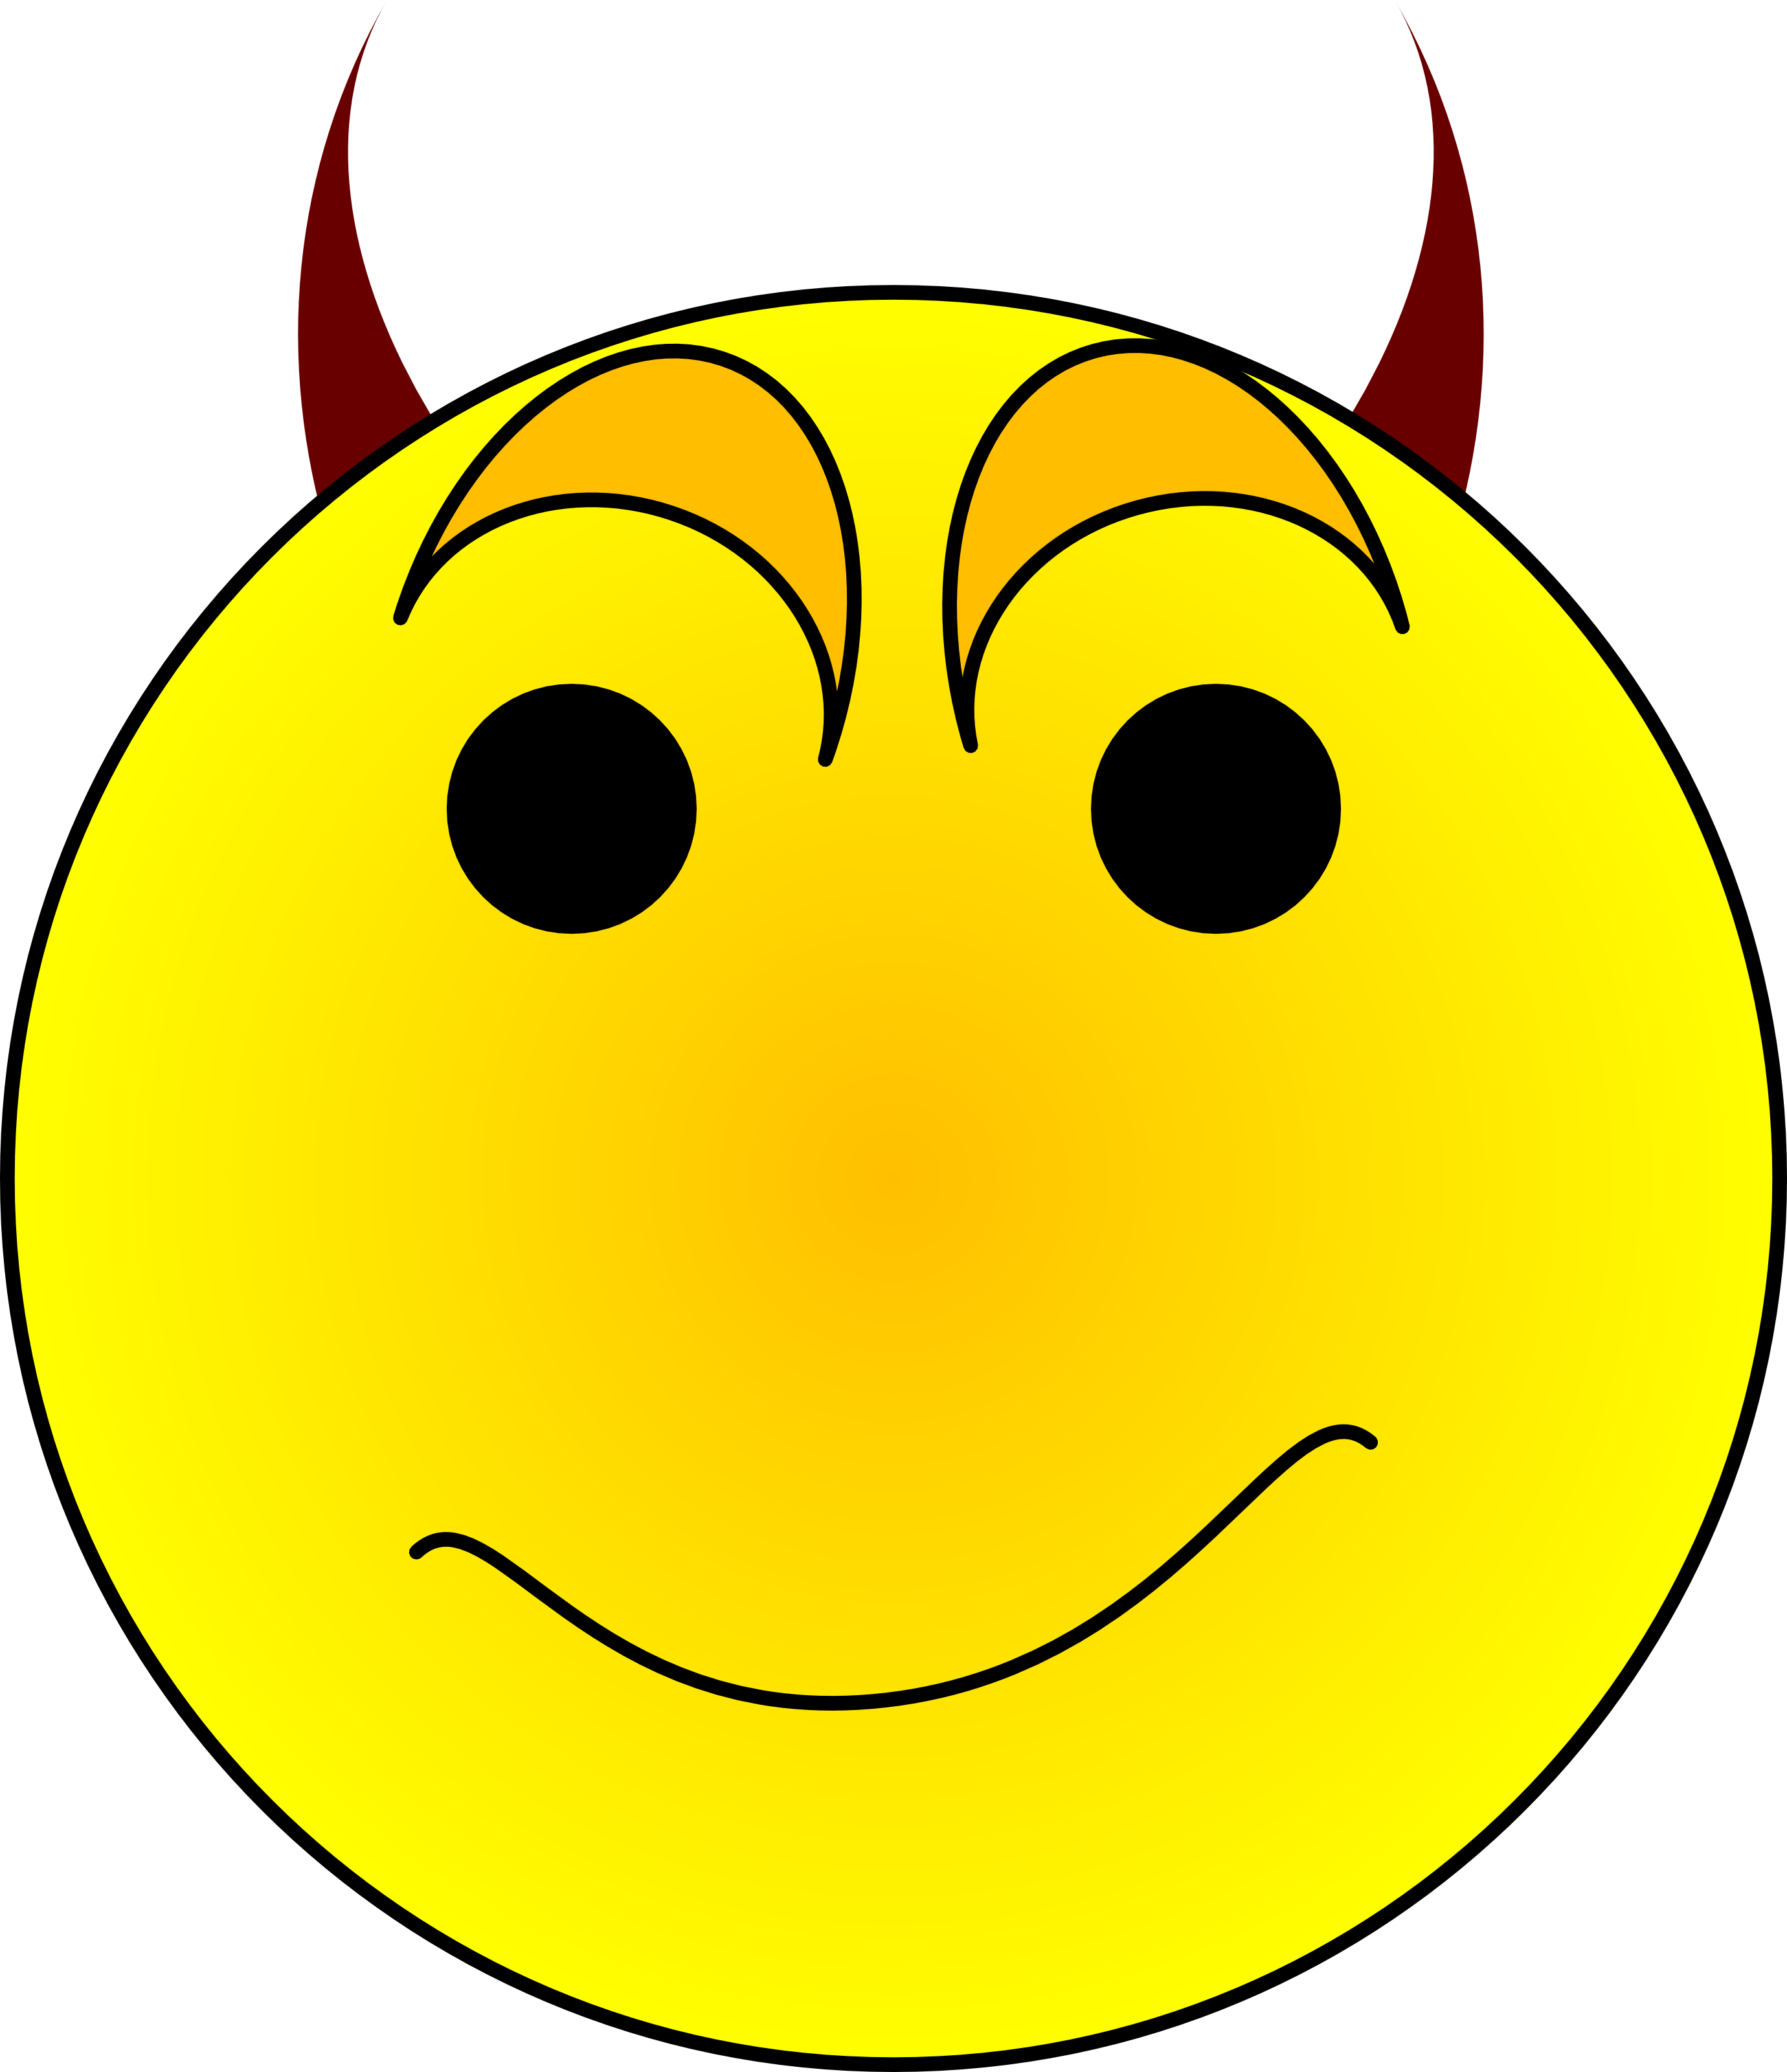 Mad clipart angry emoticon. Smiley face graphic free